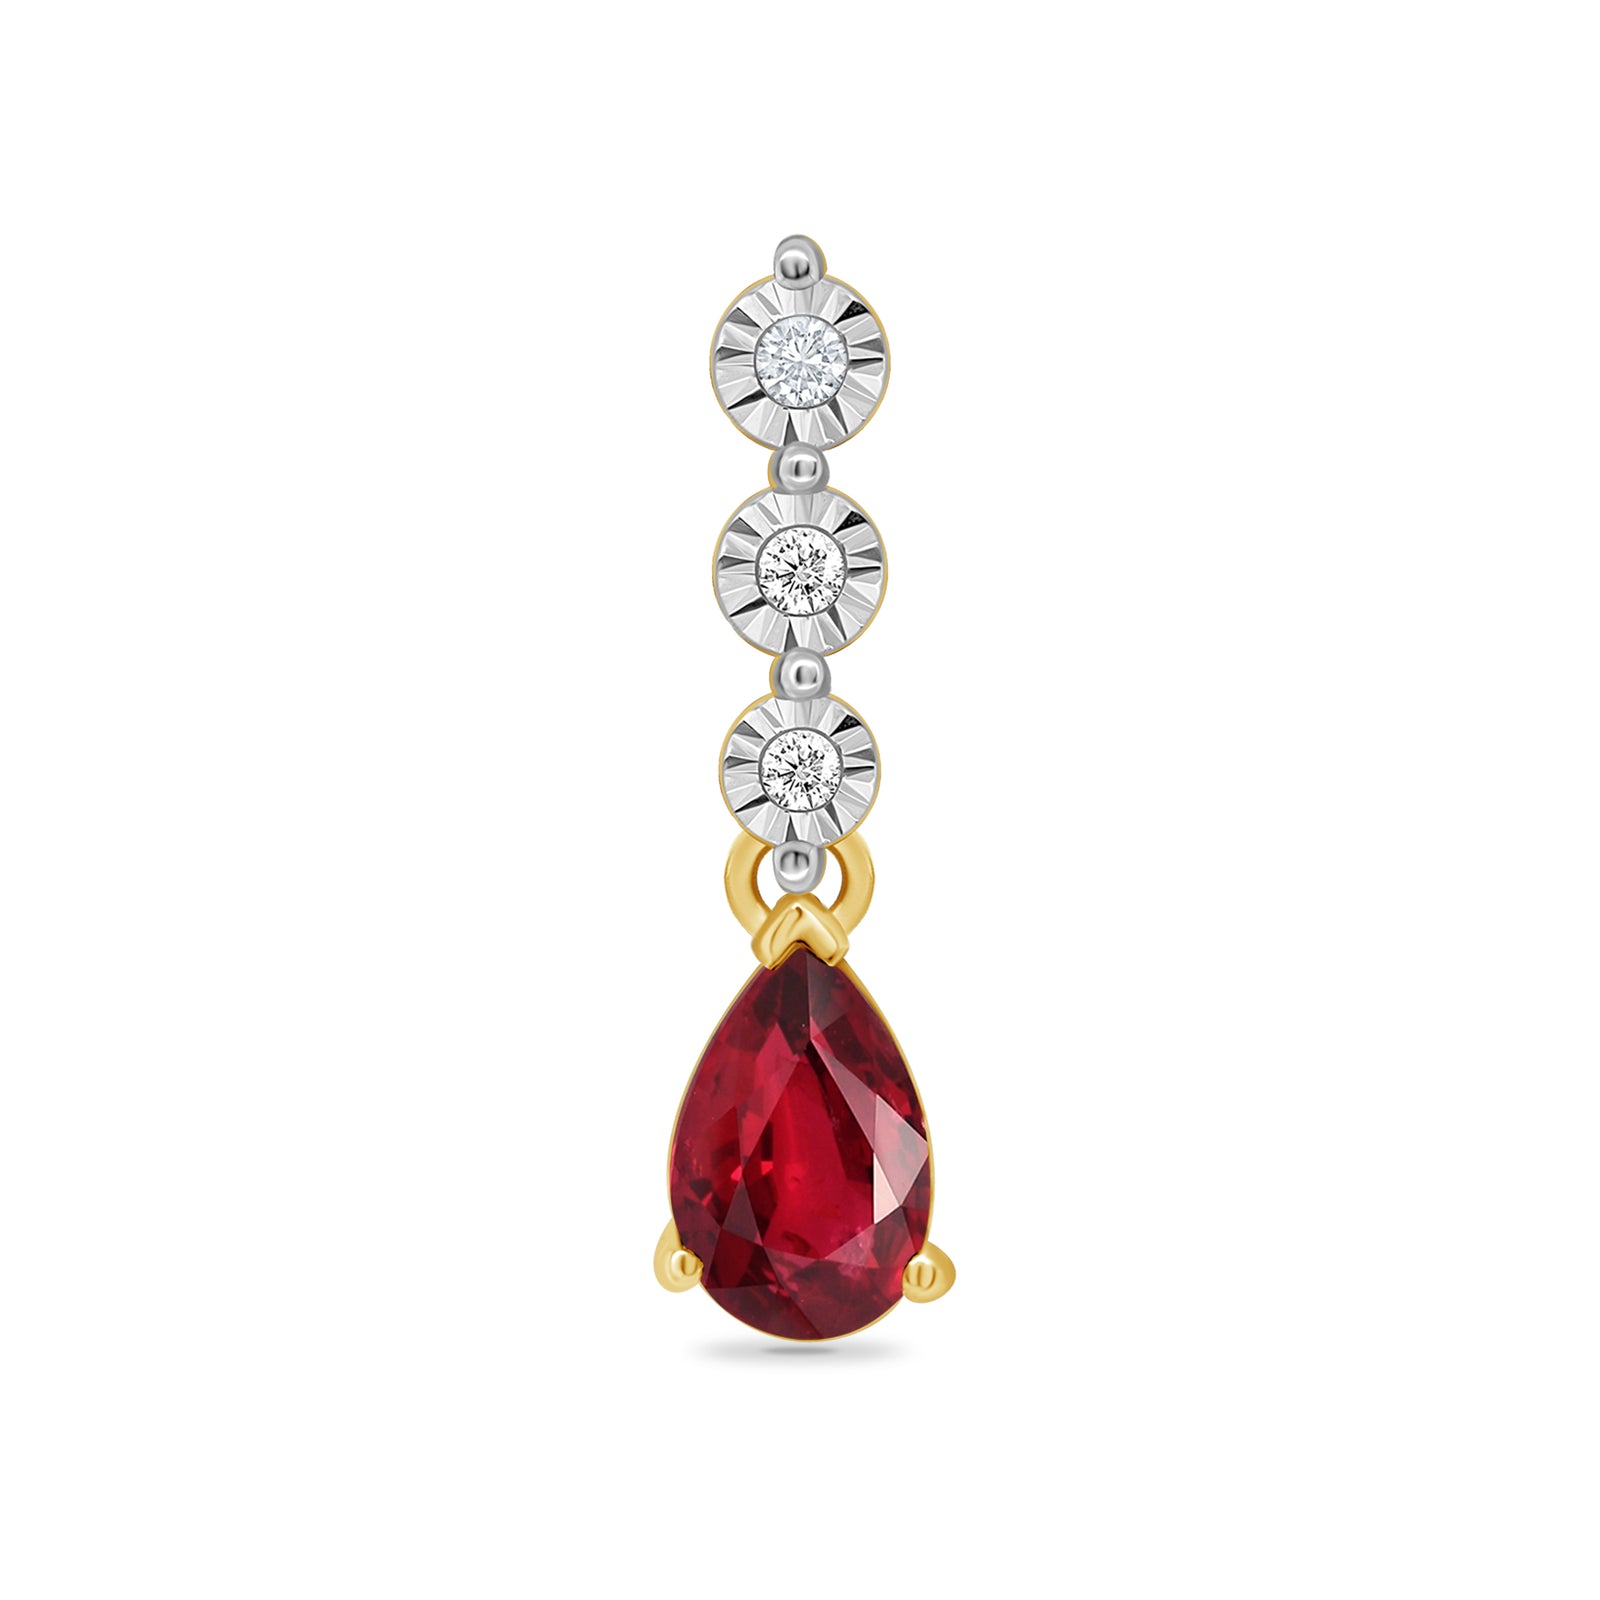 9ct gold 6x4mm pear shape ruby & miracle plate diamond pendant 0.02ct